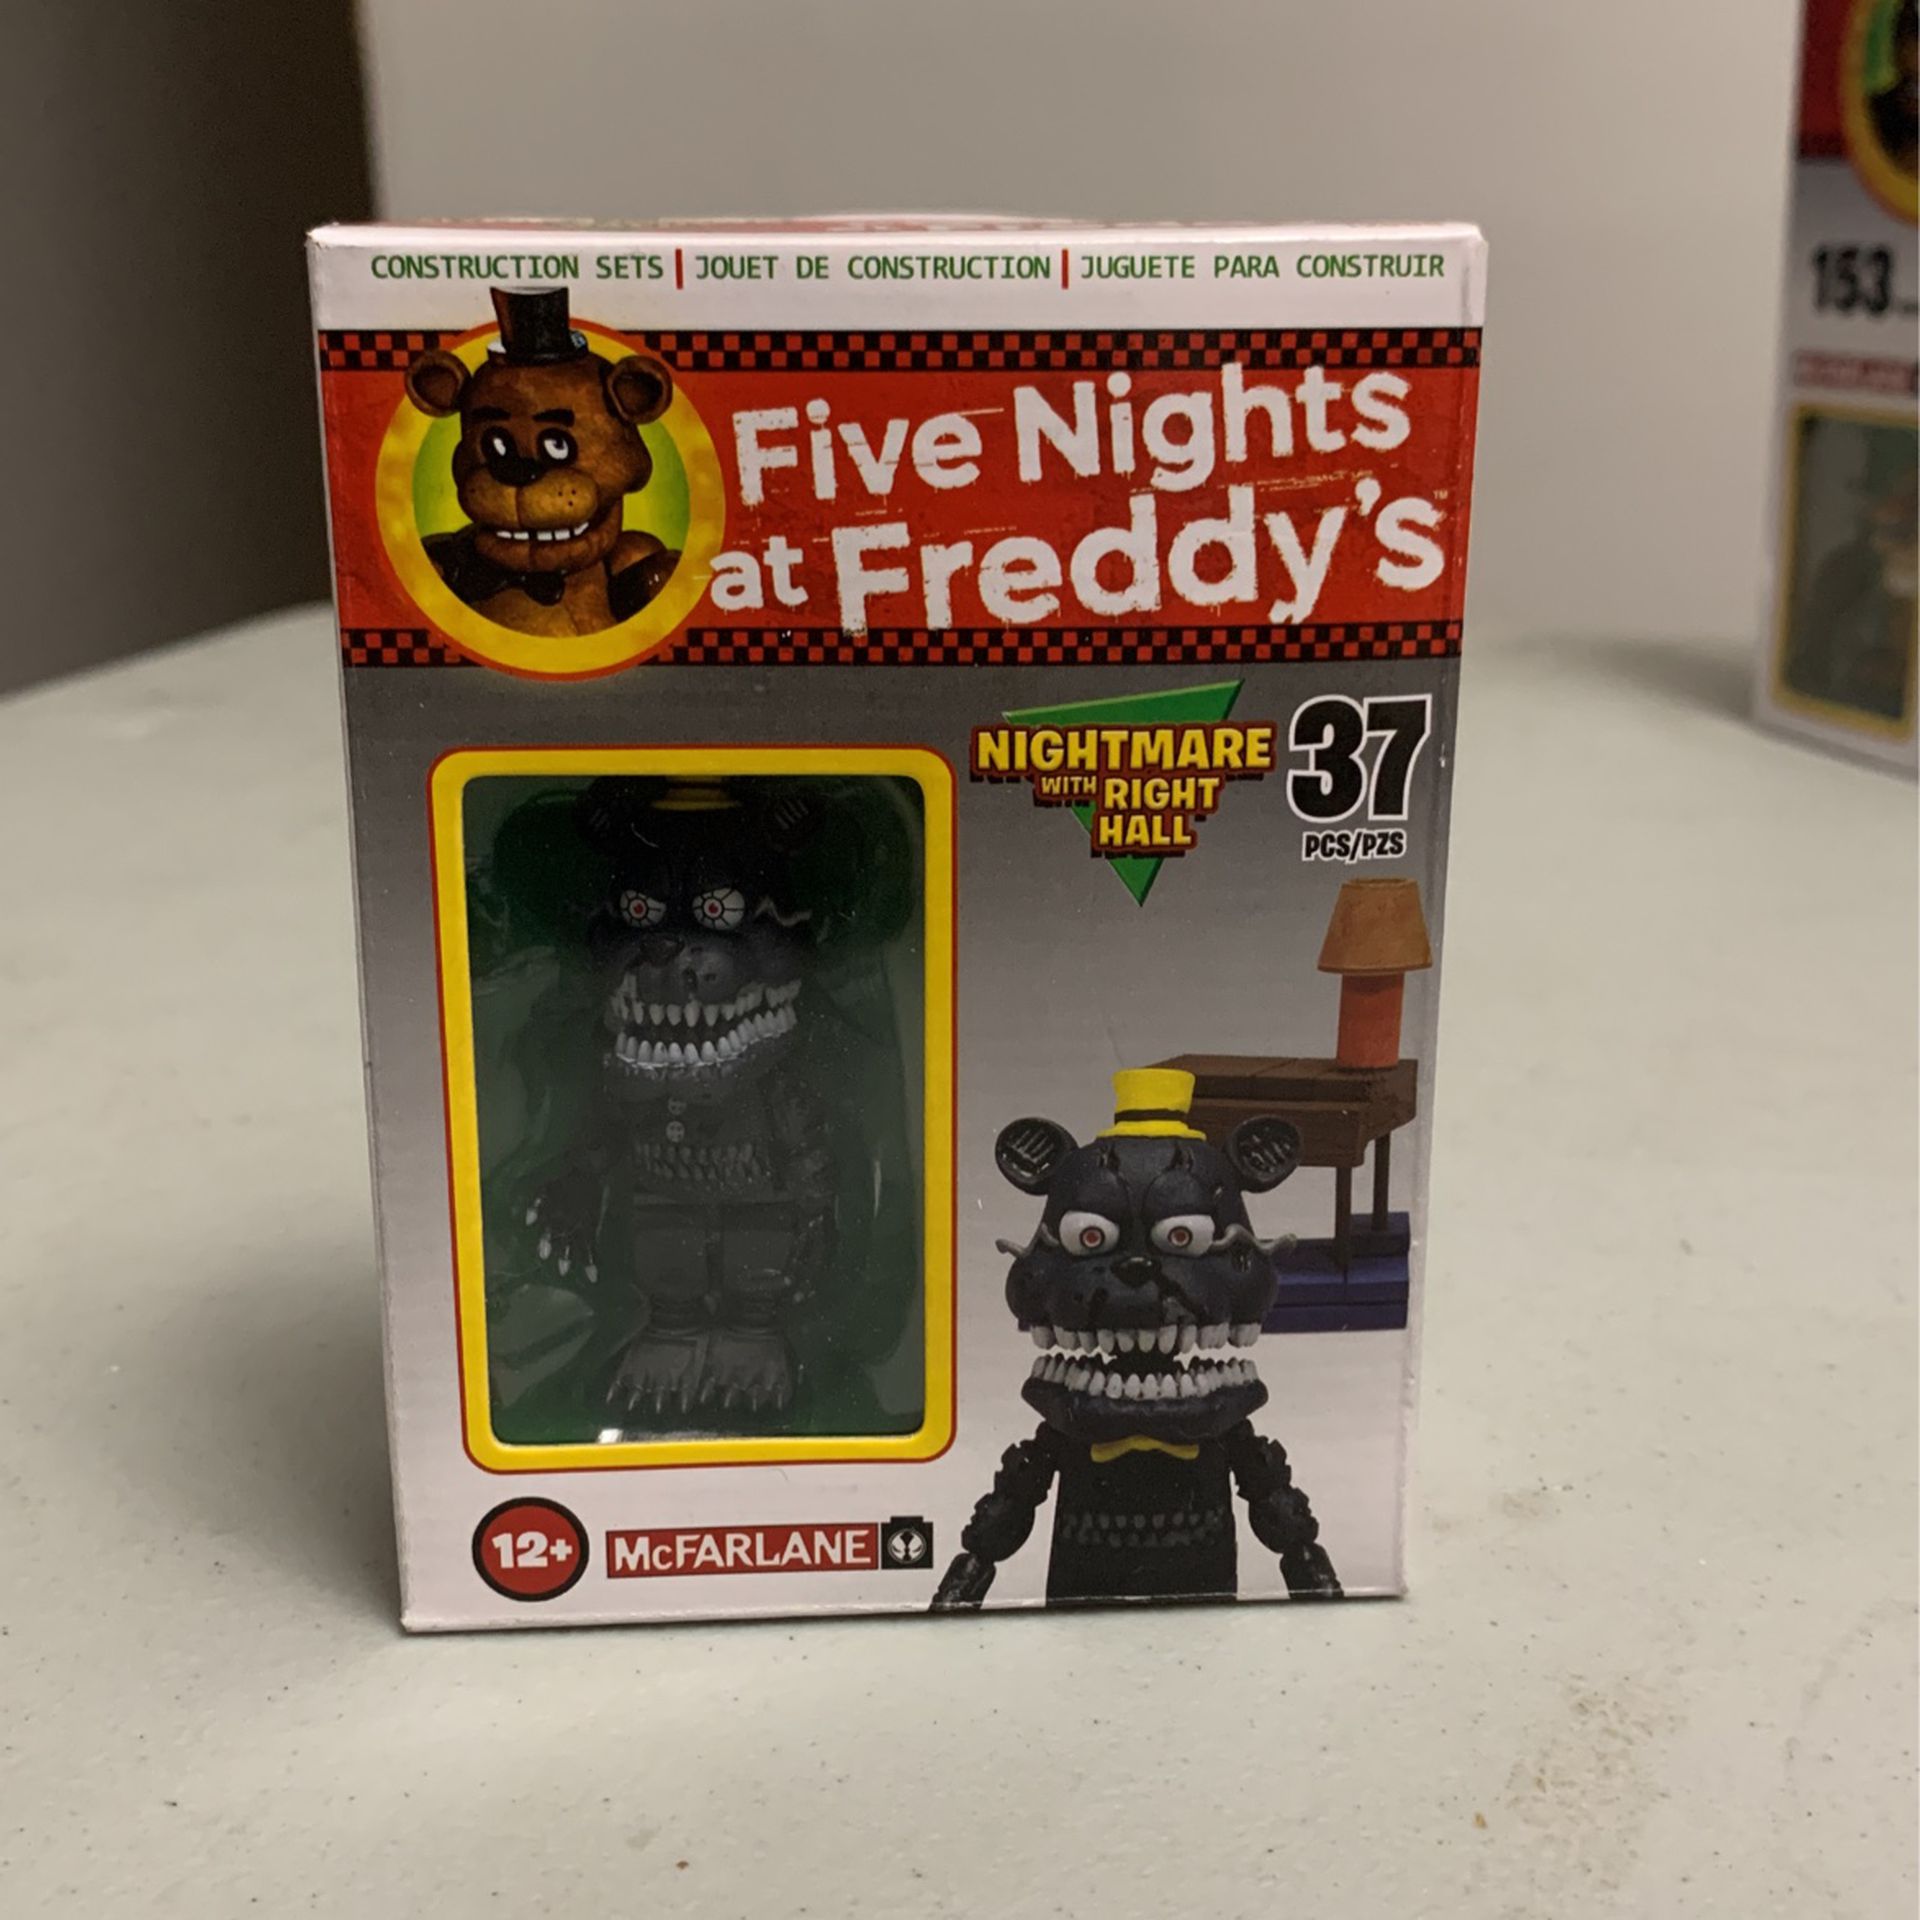 Brise Perfekt Kvadrant Five nights at Freddy's Lego “ Nightmare with right Hall for Sale in  Pembroke Pines, FL - OfferUp